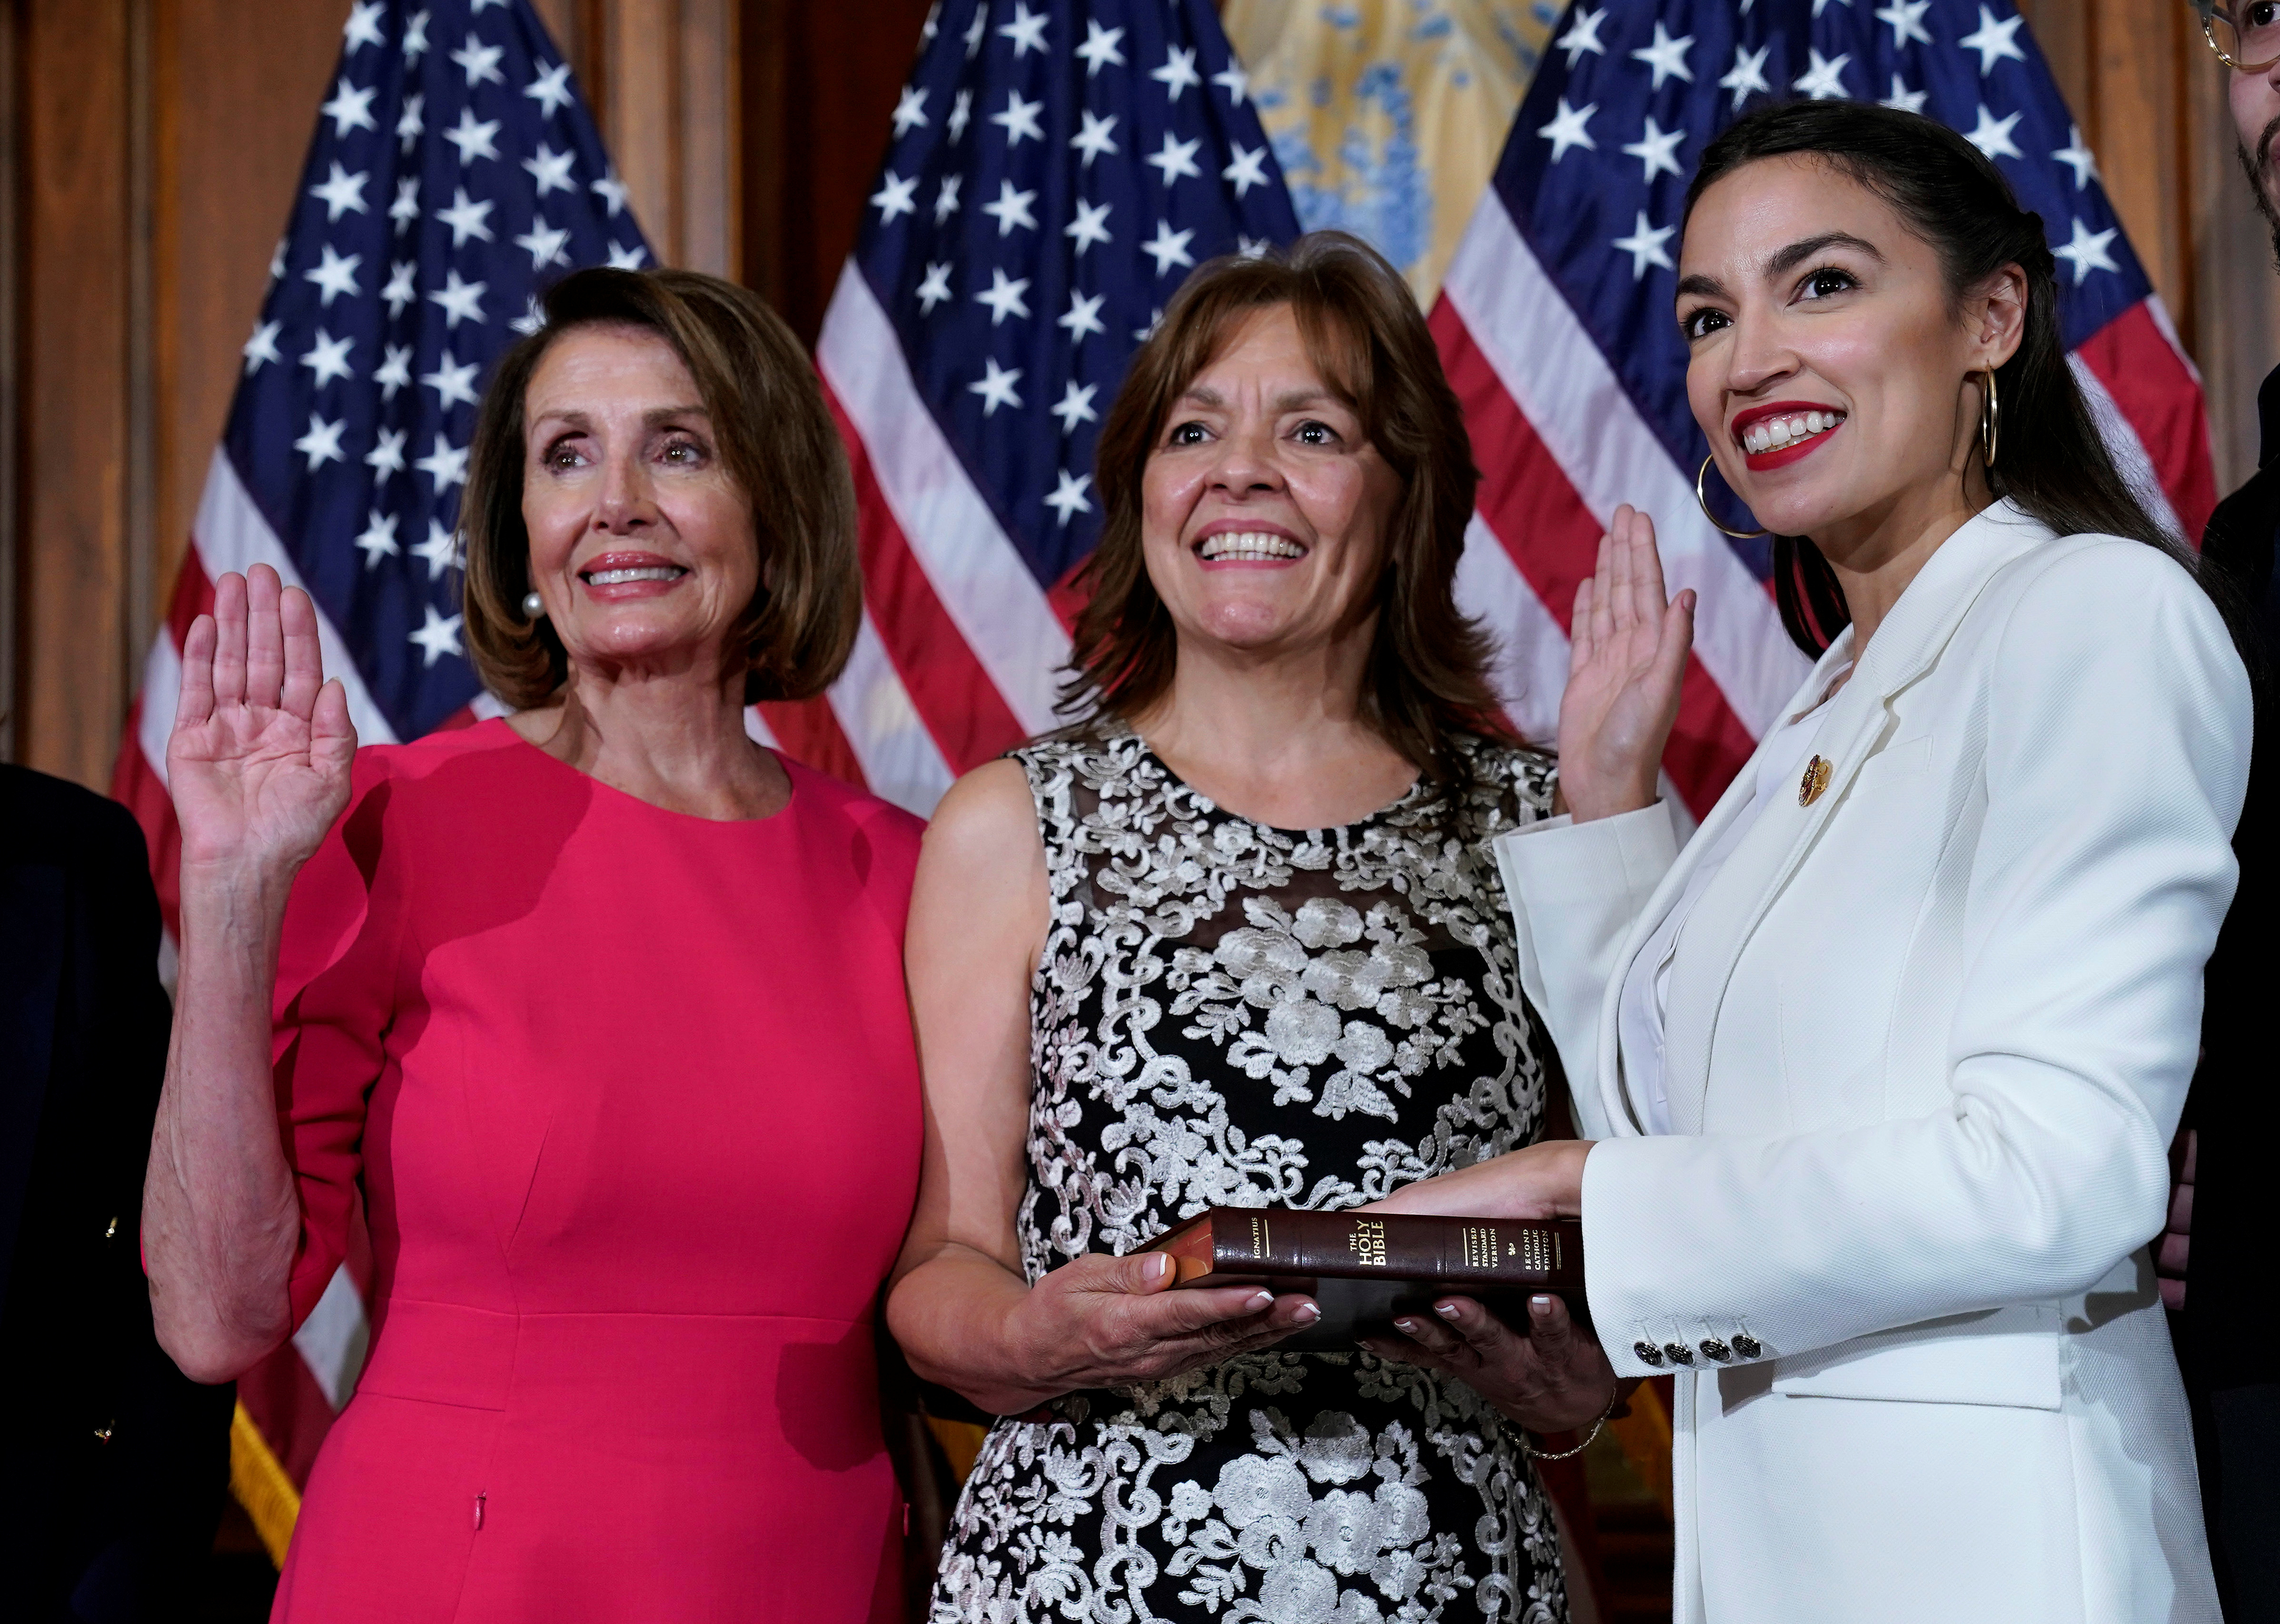 Rep. Alexandria Ocasio-Cortez (D-NY) poses with Speaker of the House Nancy Pelosi (D-CA) for a ceremonial swearing-in picture on Capitol Hill in Washington